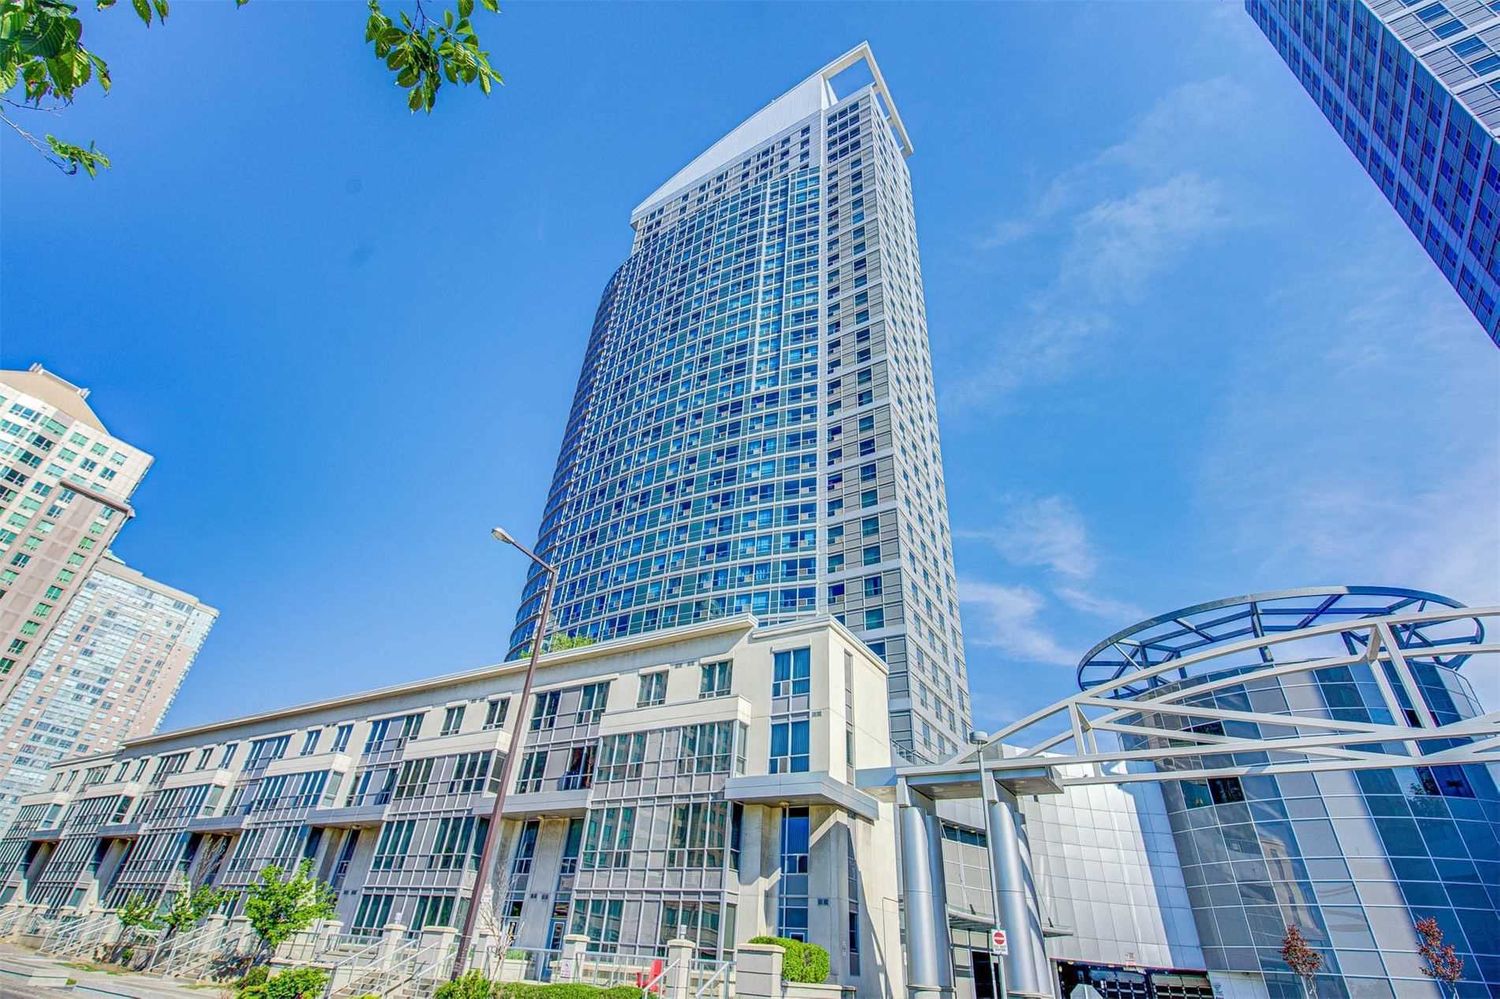 36 Lee Centre Drive. Ellipse - West Tower Condos is located in  Scarborough, Toronto - image #2 of 2